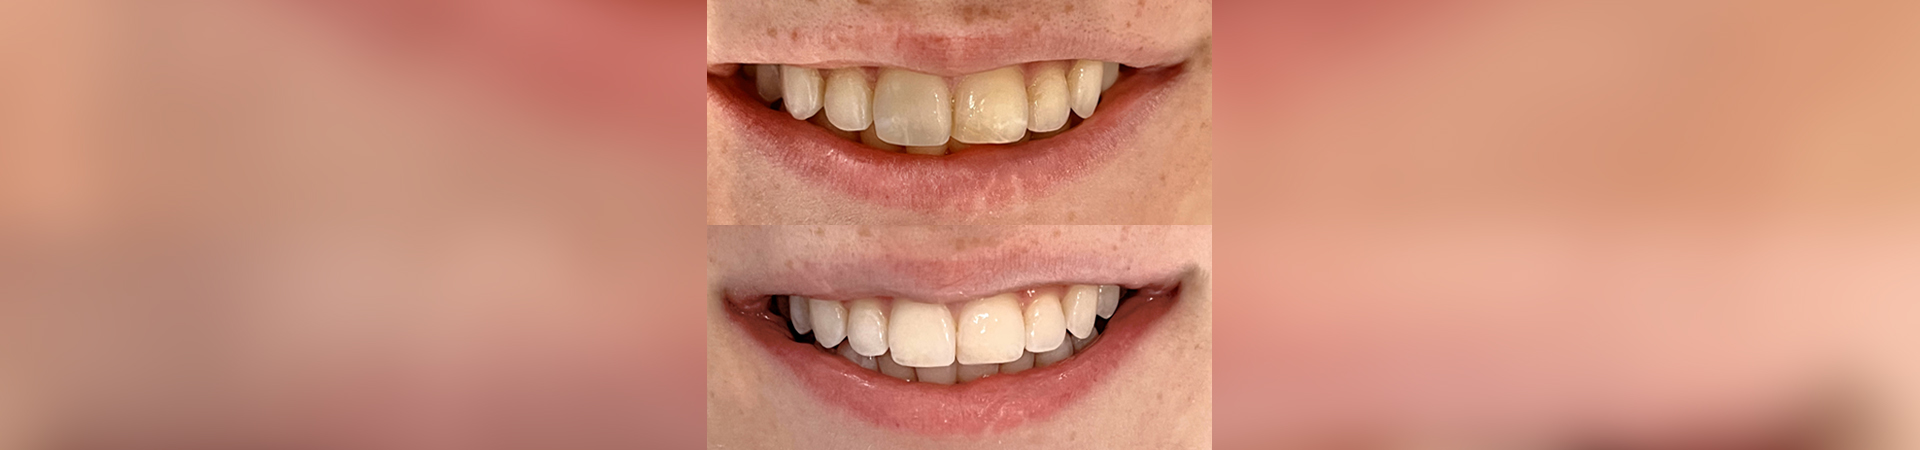 Enamel Discoloration Treatment Before & After Smile